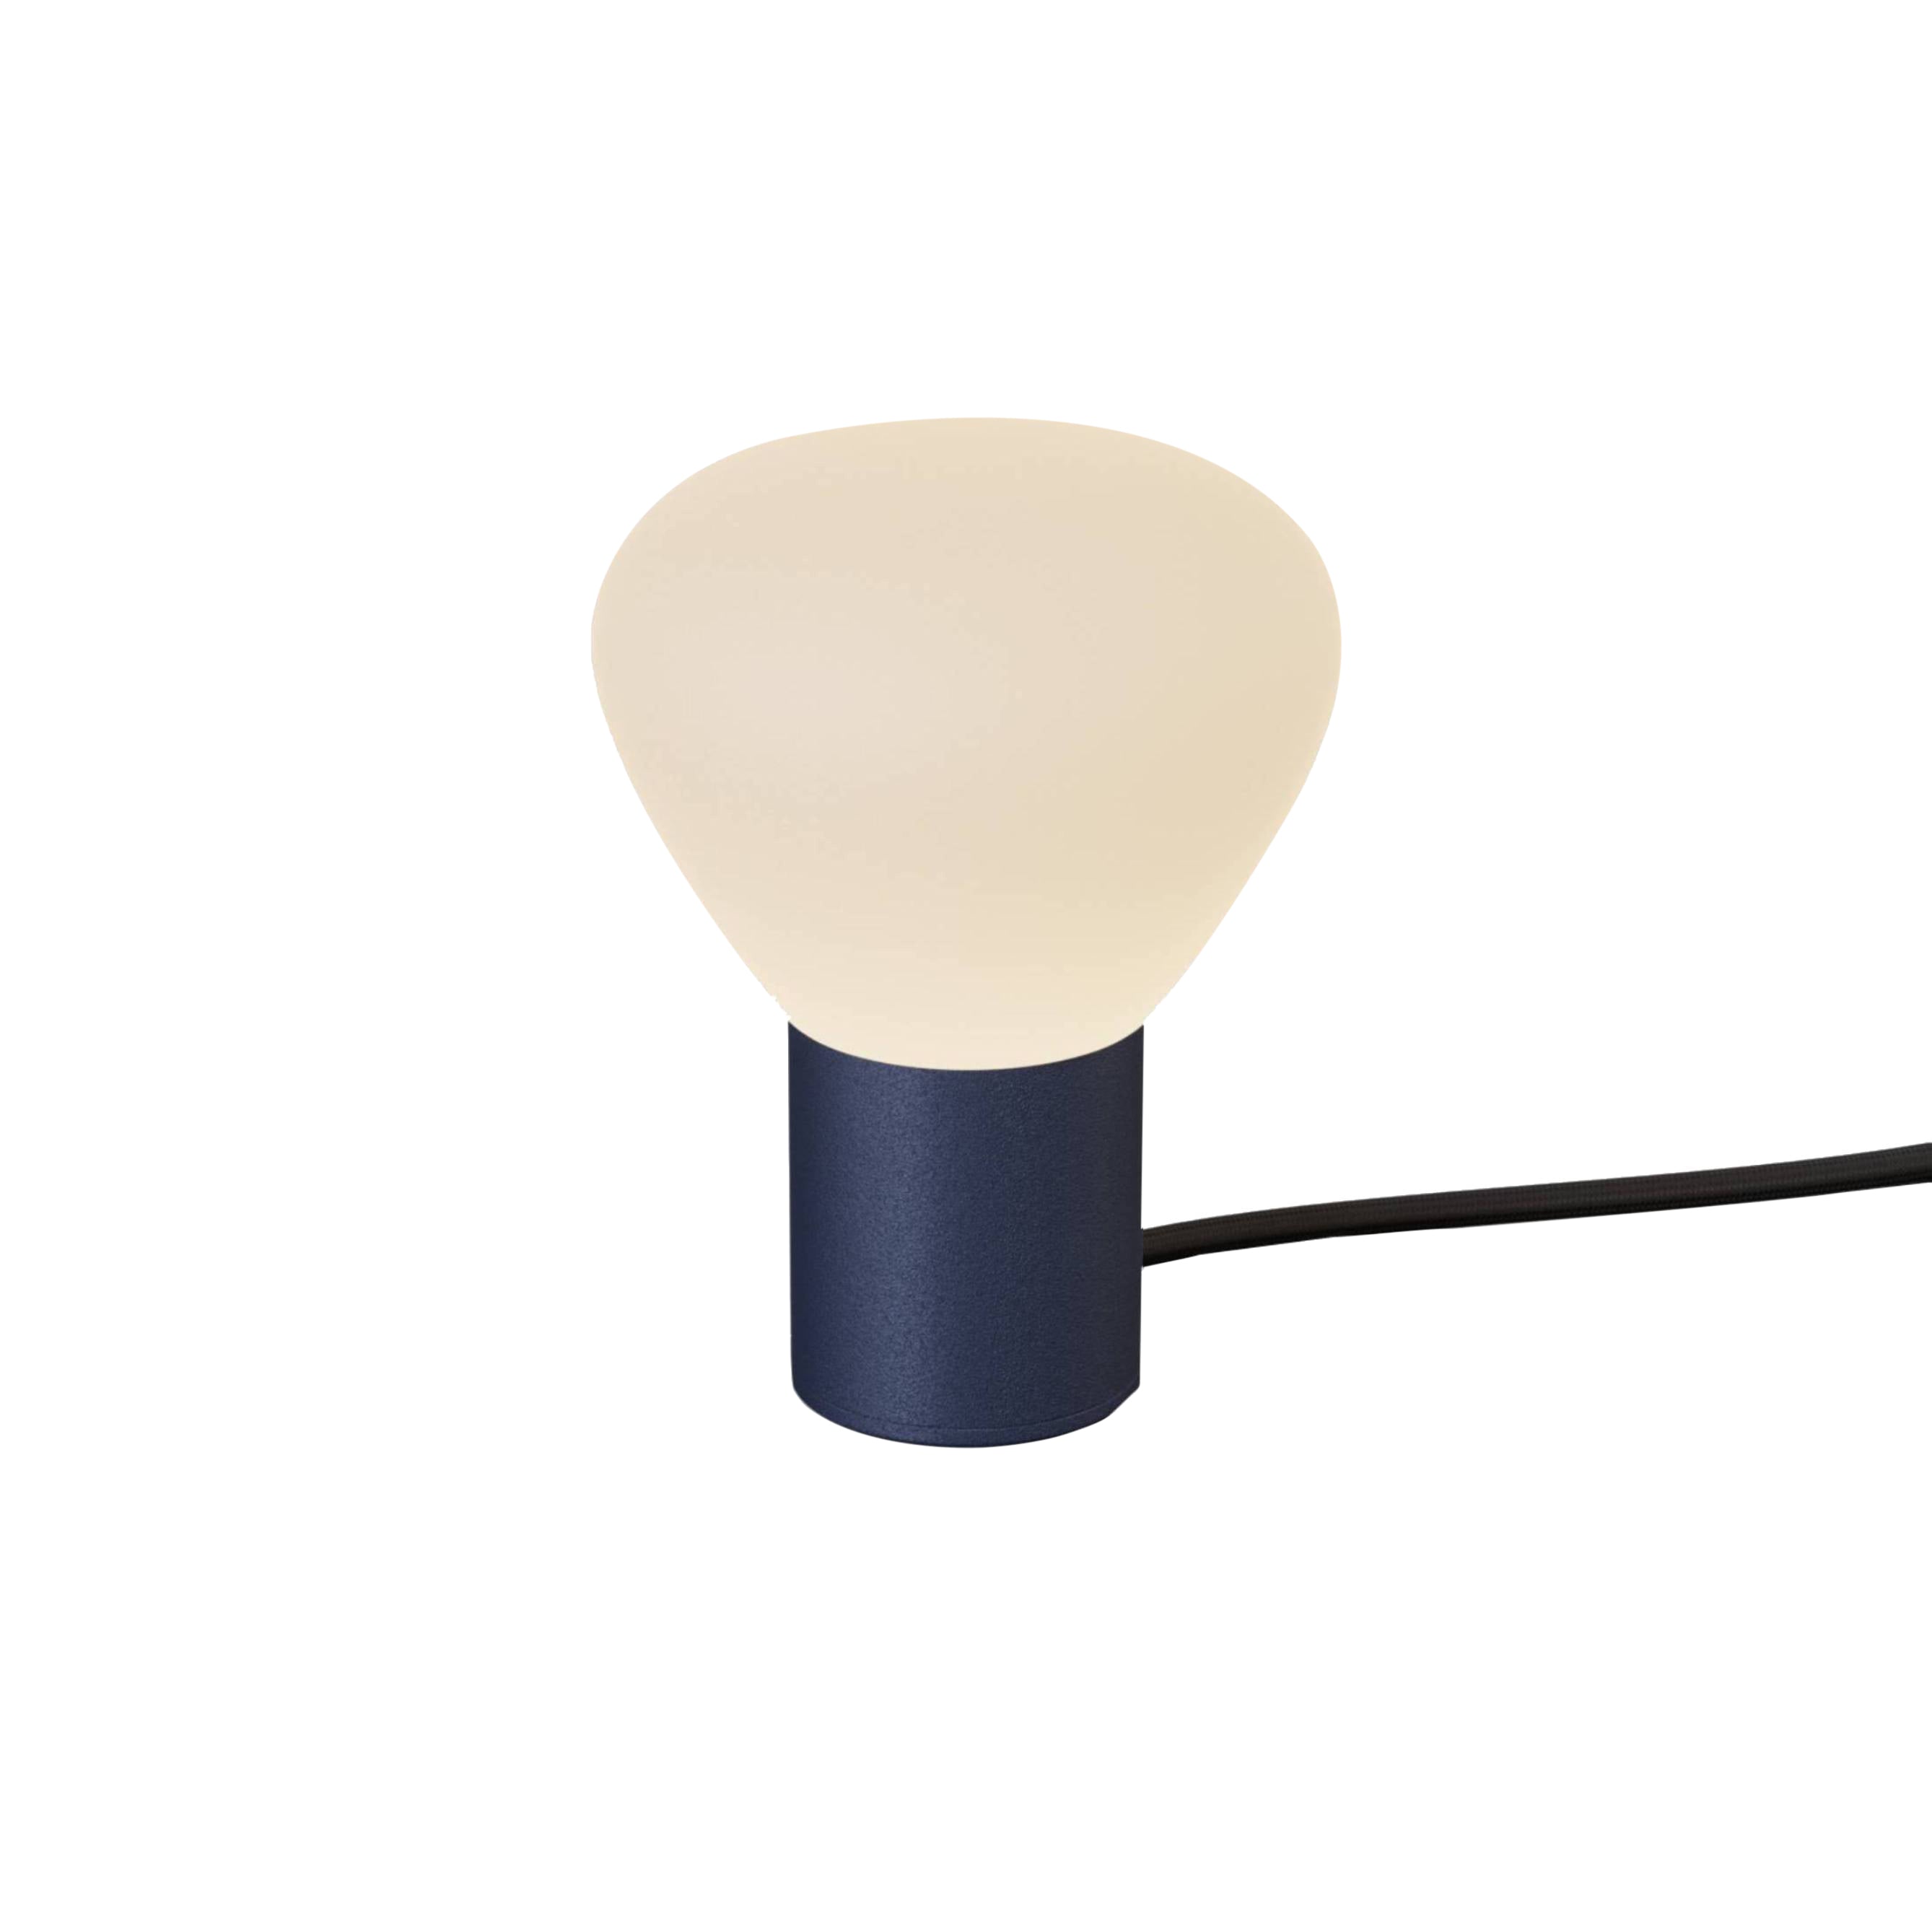 Parc 01 Table Lamp: Footswitch + Midnight Blue + Black